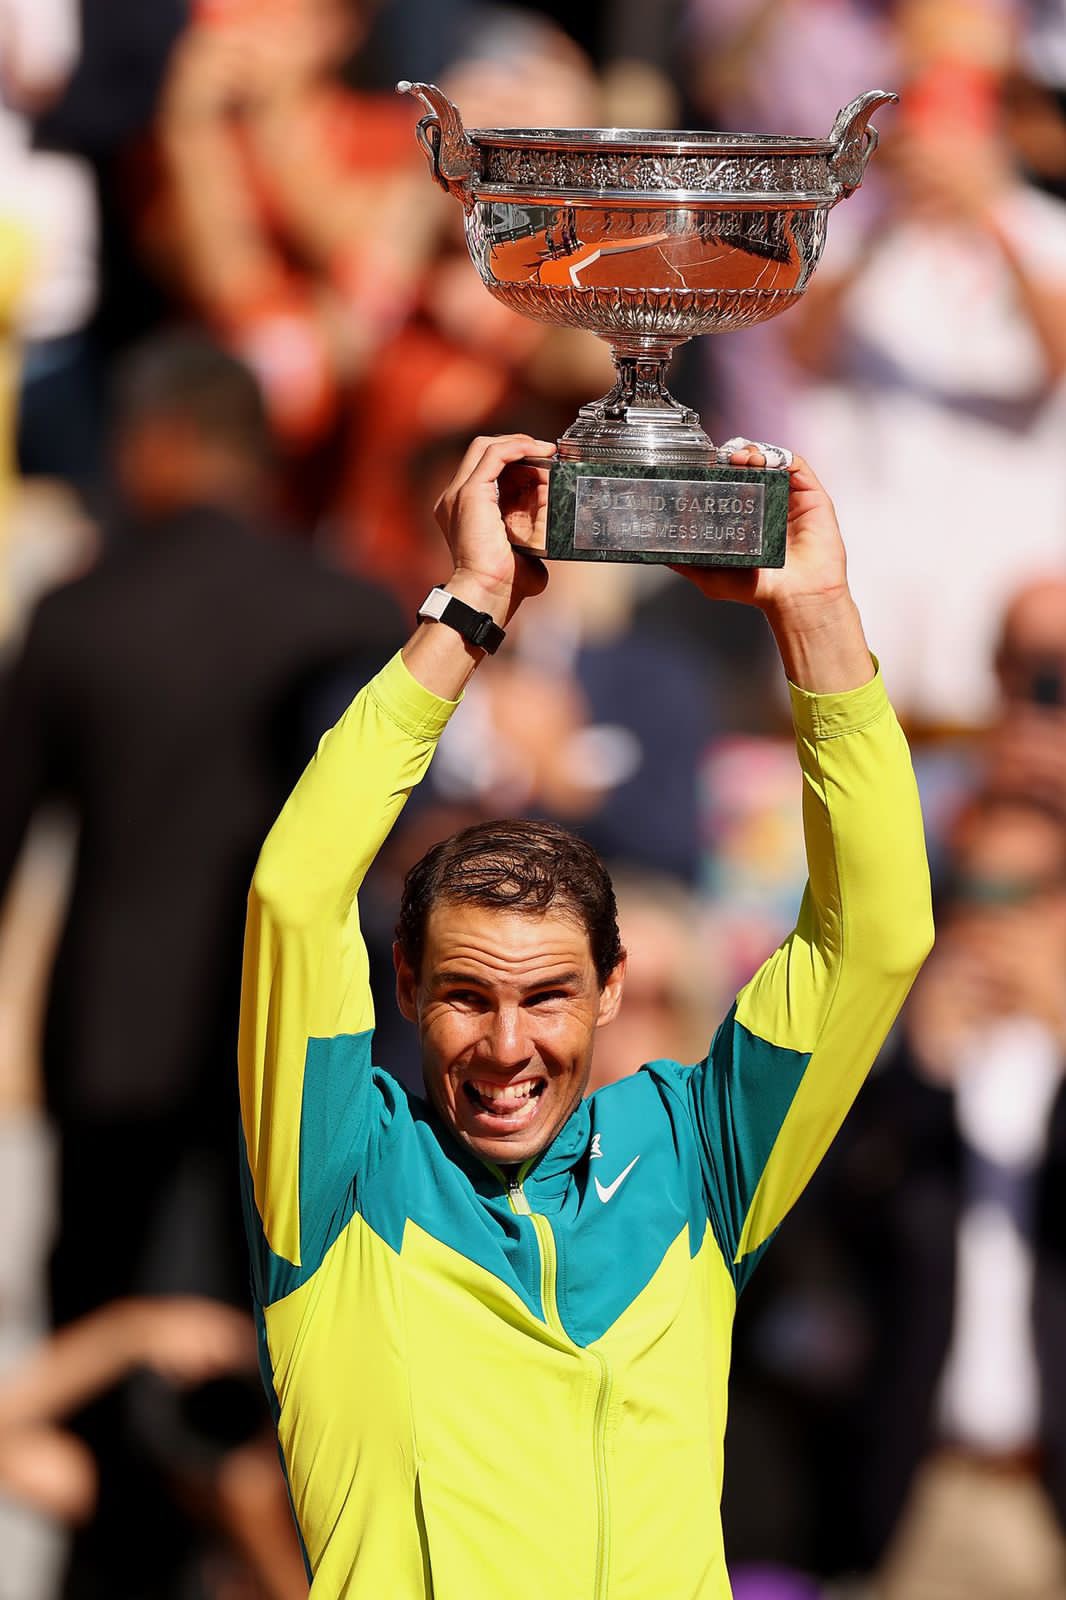 KING OF CLAY WINS AN UNPRECEDENTED 22 GRAND SLAM TITLE